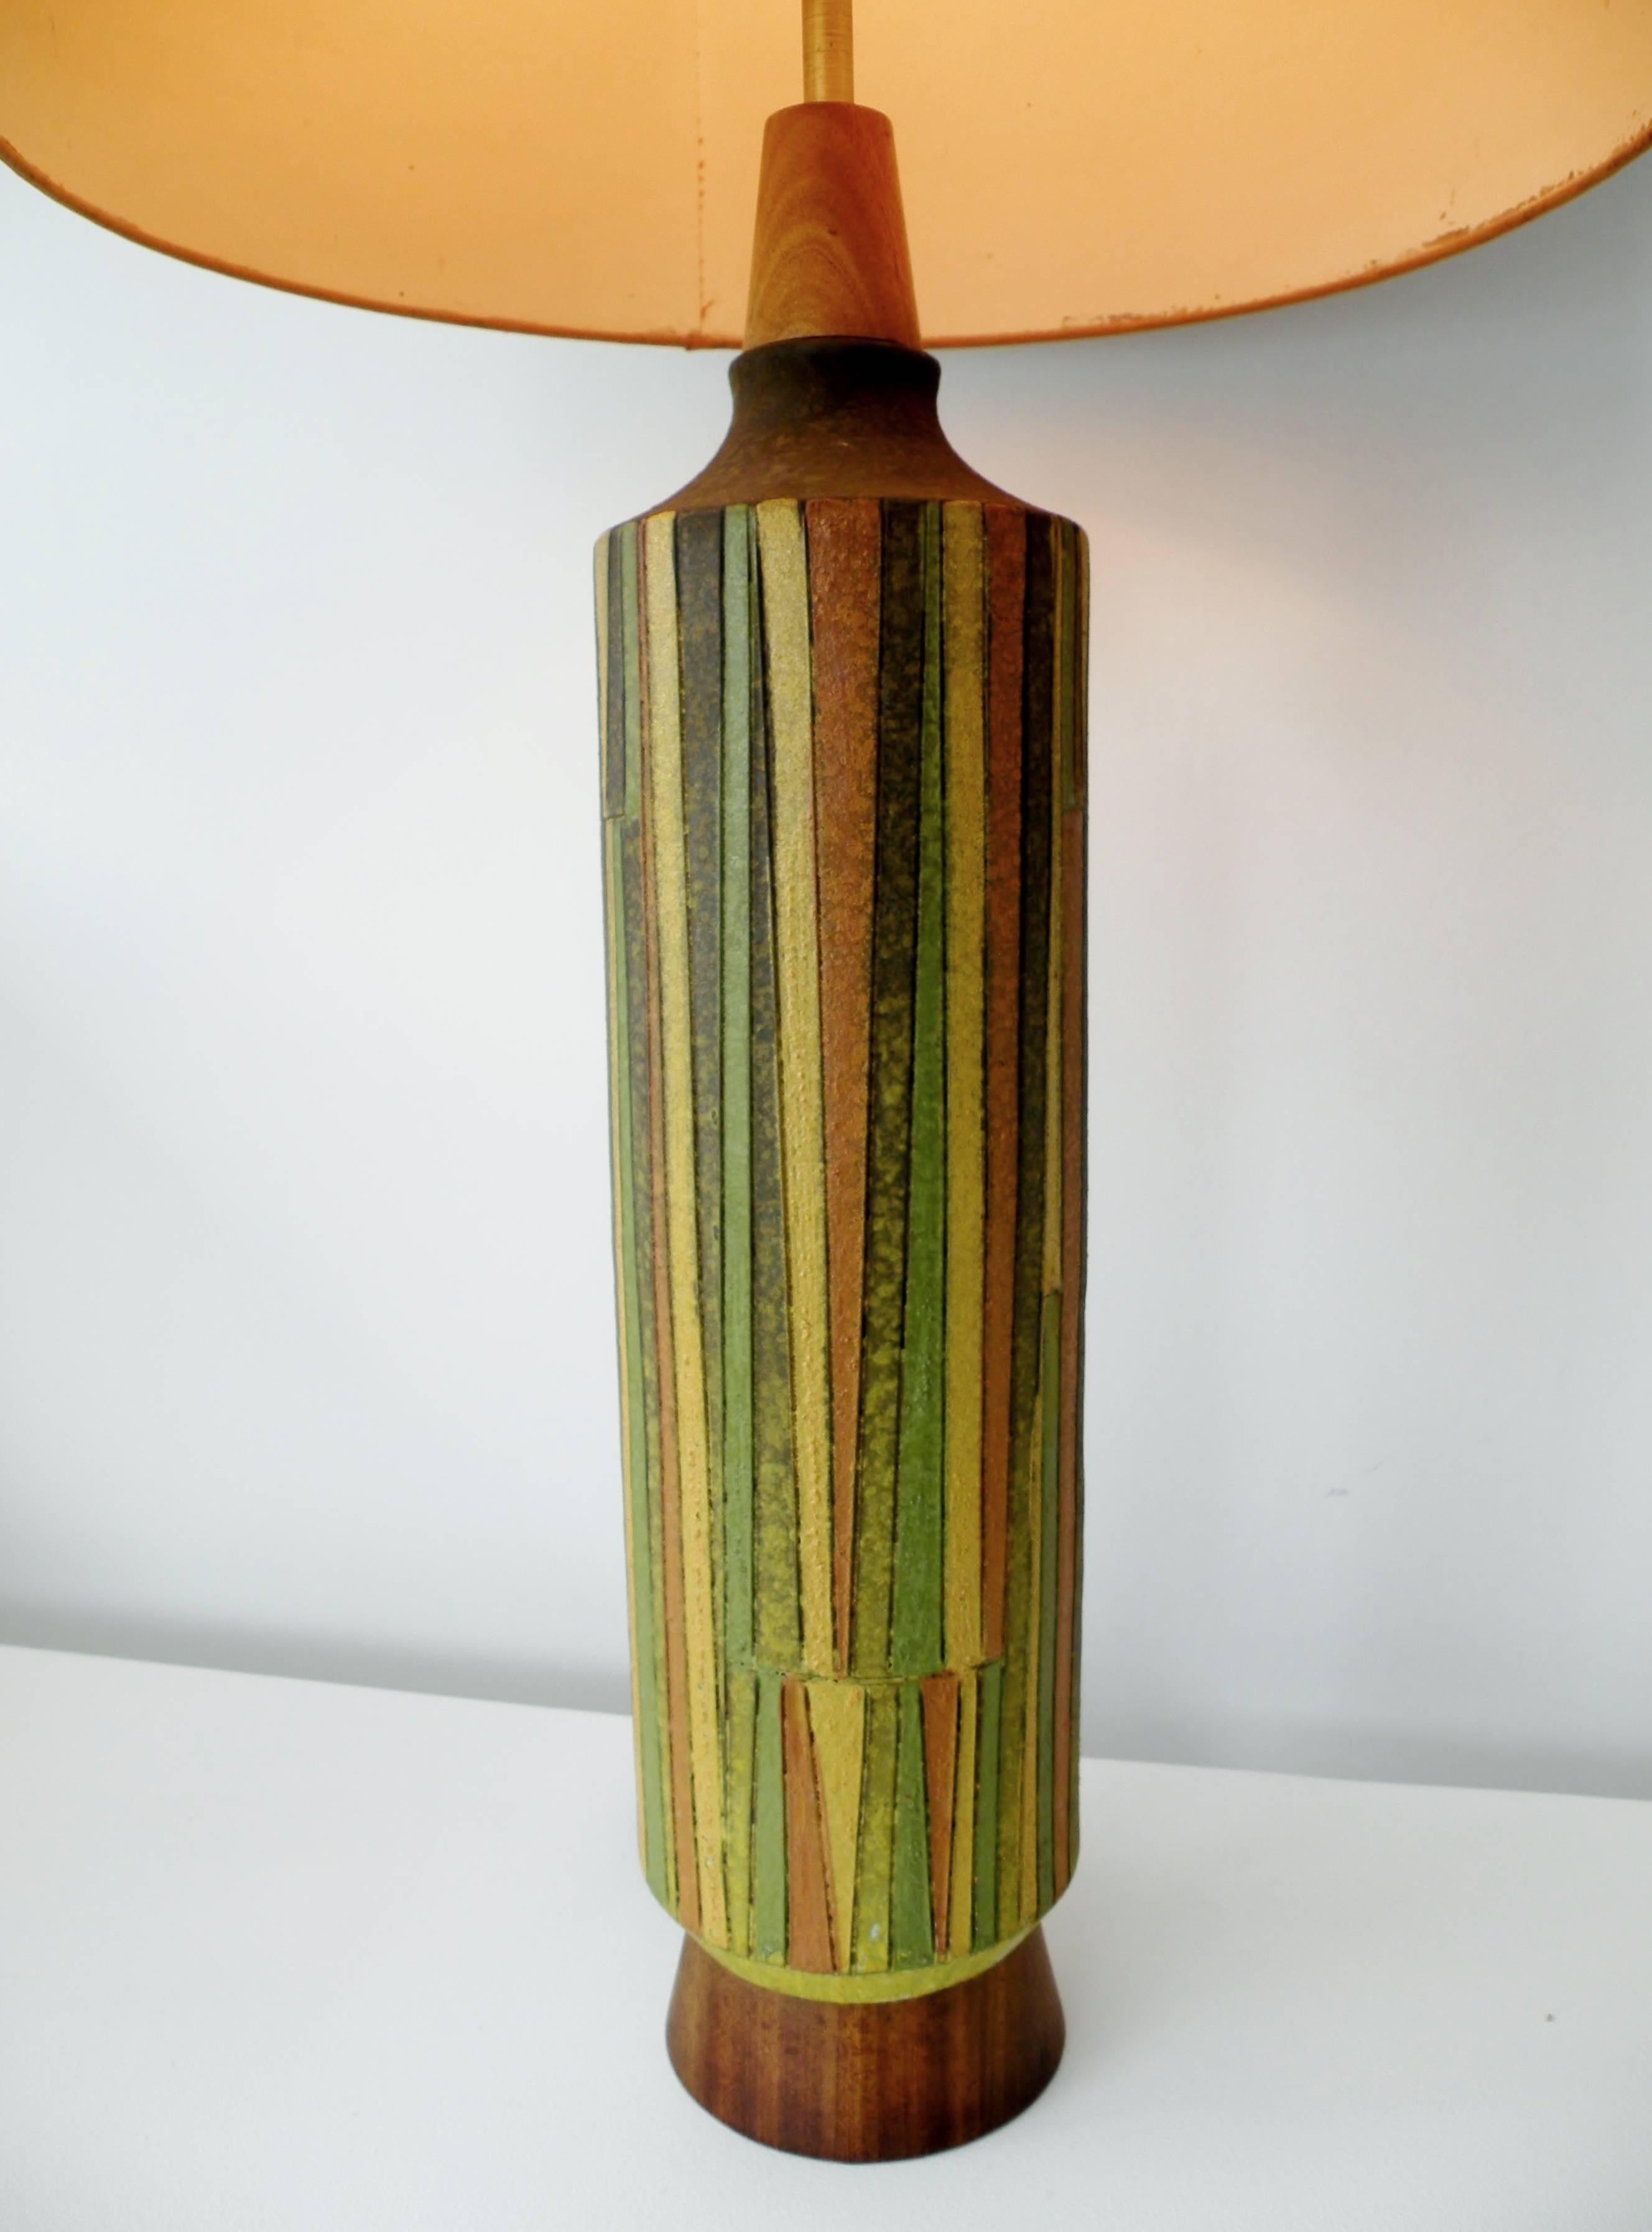 Monumental Italian art pottery table lamp from the 